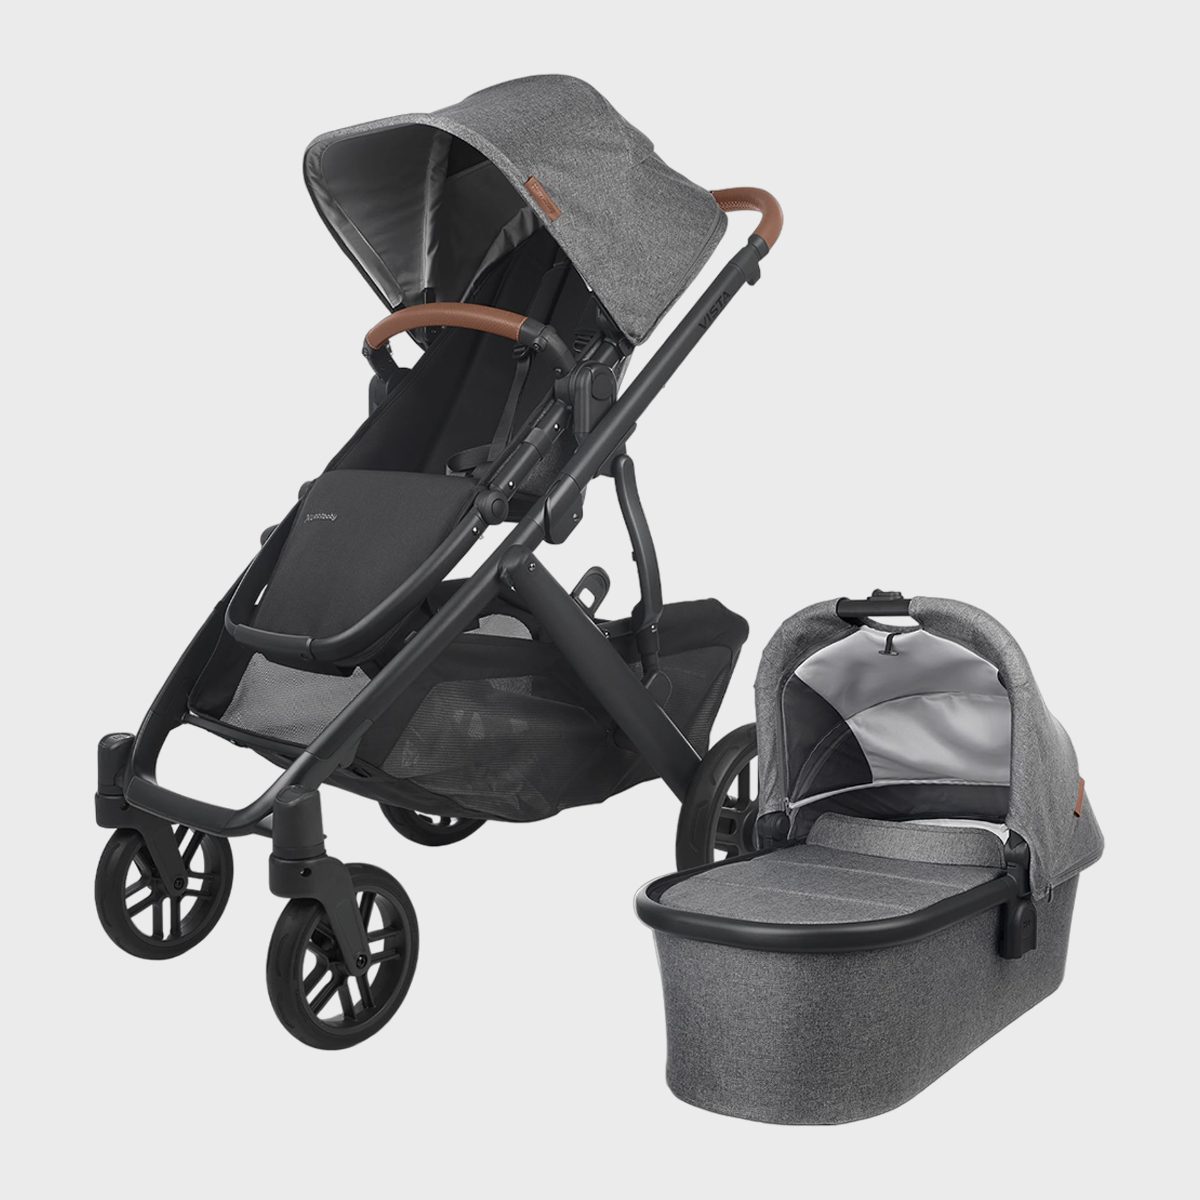 <p>When I was a <a href="https://www.rd.com/list/mothers-day-gifts-for-new-moms/">new mom</a> and pregnant with my first baby, I researched the heck out of strollers before deciding on the <a href="https://www.potterybarnkids.com/products/uppababy-vista-v2-stroller" rel="noopener noreferrer">Uppababy Vista</a>. And I'm so glad I did. There are countless things to love about this popular stroller: it's easy to maneuver, has an easy, one-step fold and has a huge underseat storage basket that I found to be invaluable as a mom of multiple children.</p> <p>This stroller comes with a toddler seat that faces forward or back, and a bassinet for long, leisurely strolls. But the best thing about this stroller? As your family grows, it <a href="https://www.rd.com/list/gifts-for-toddlers/">grows with you</a>. Thanks to the available conversion options, this stroller accommodates up to three children.</p> <p class="listicle-page__cta-button-shop"><a class="shop-btn" href="https://www.potterybarnkids.com/products/uppababy-vista-v2-stroller">Shop Now</a></p>